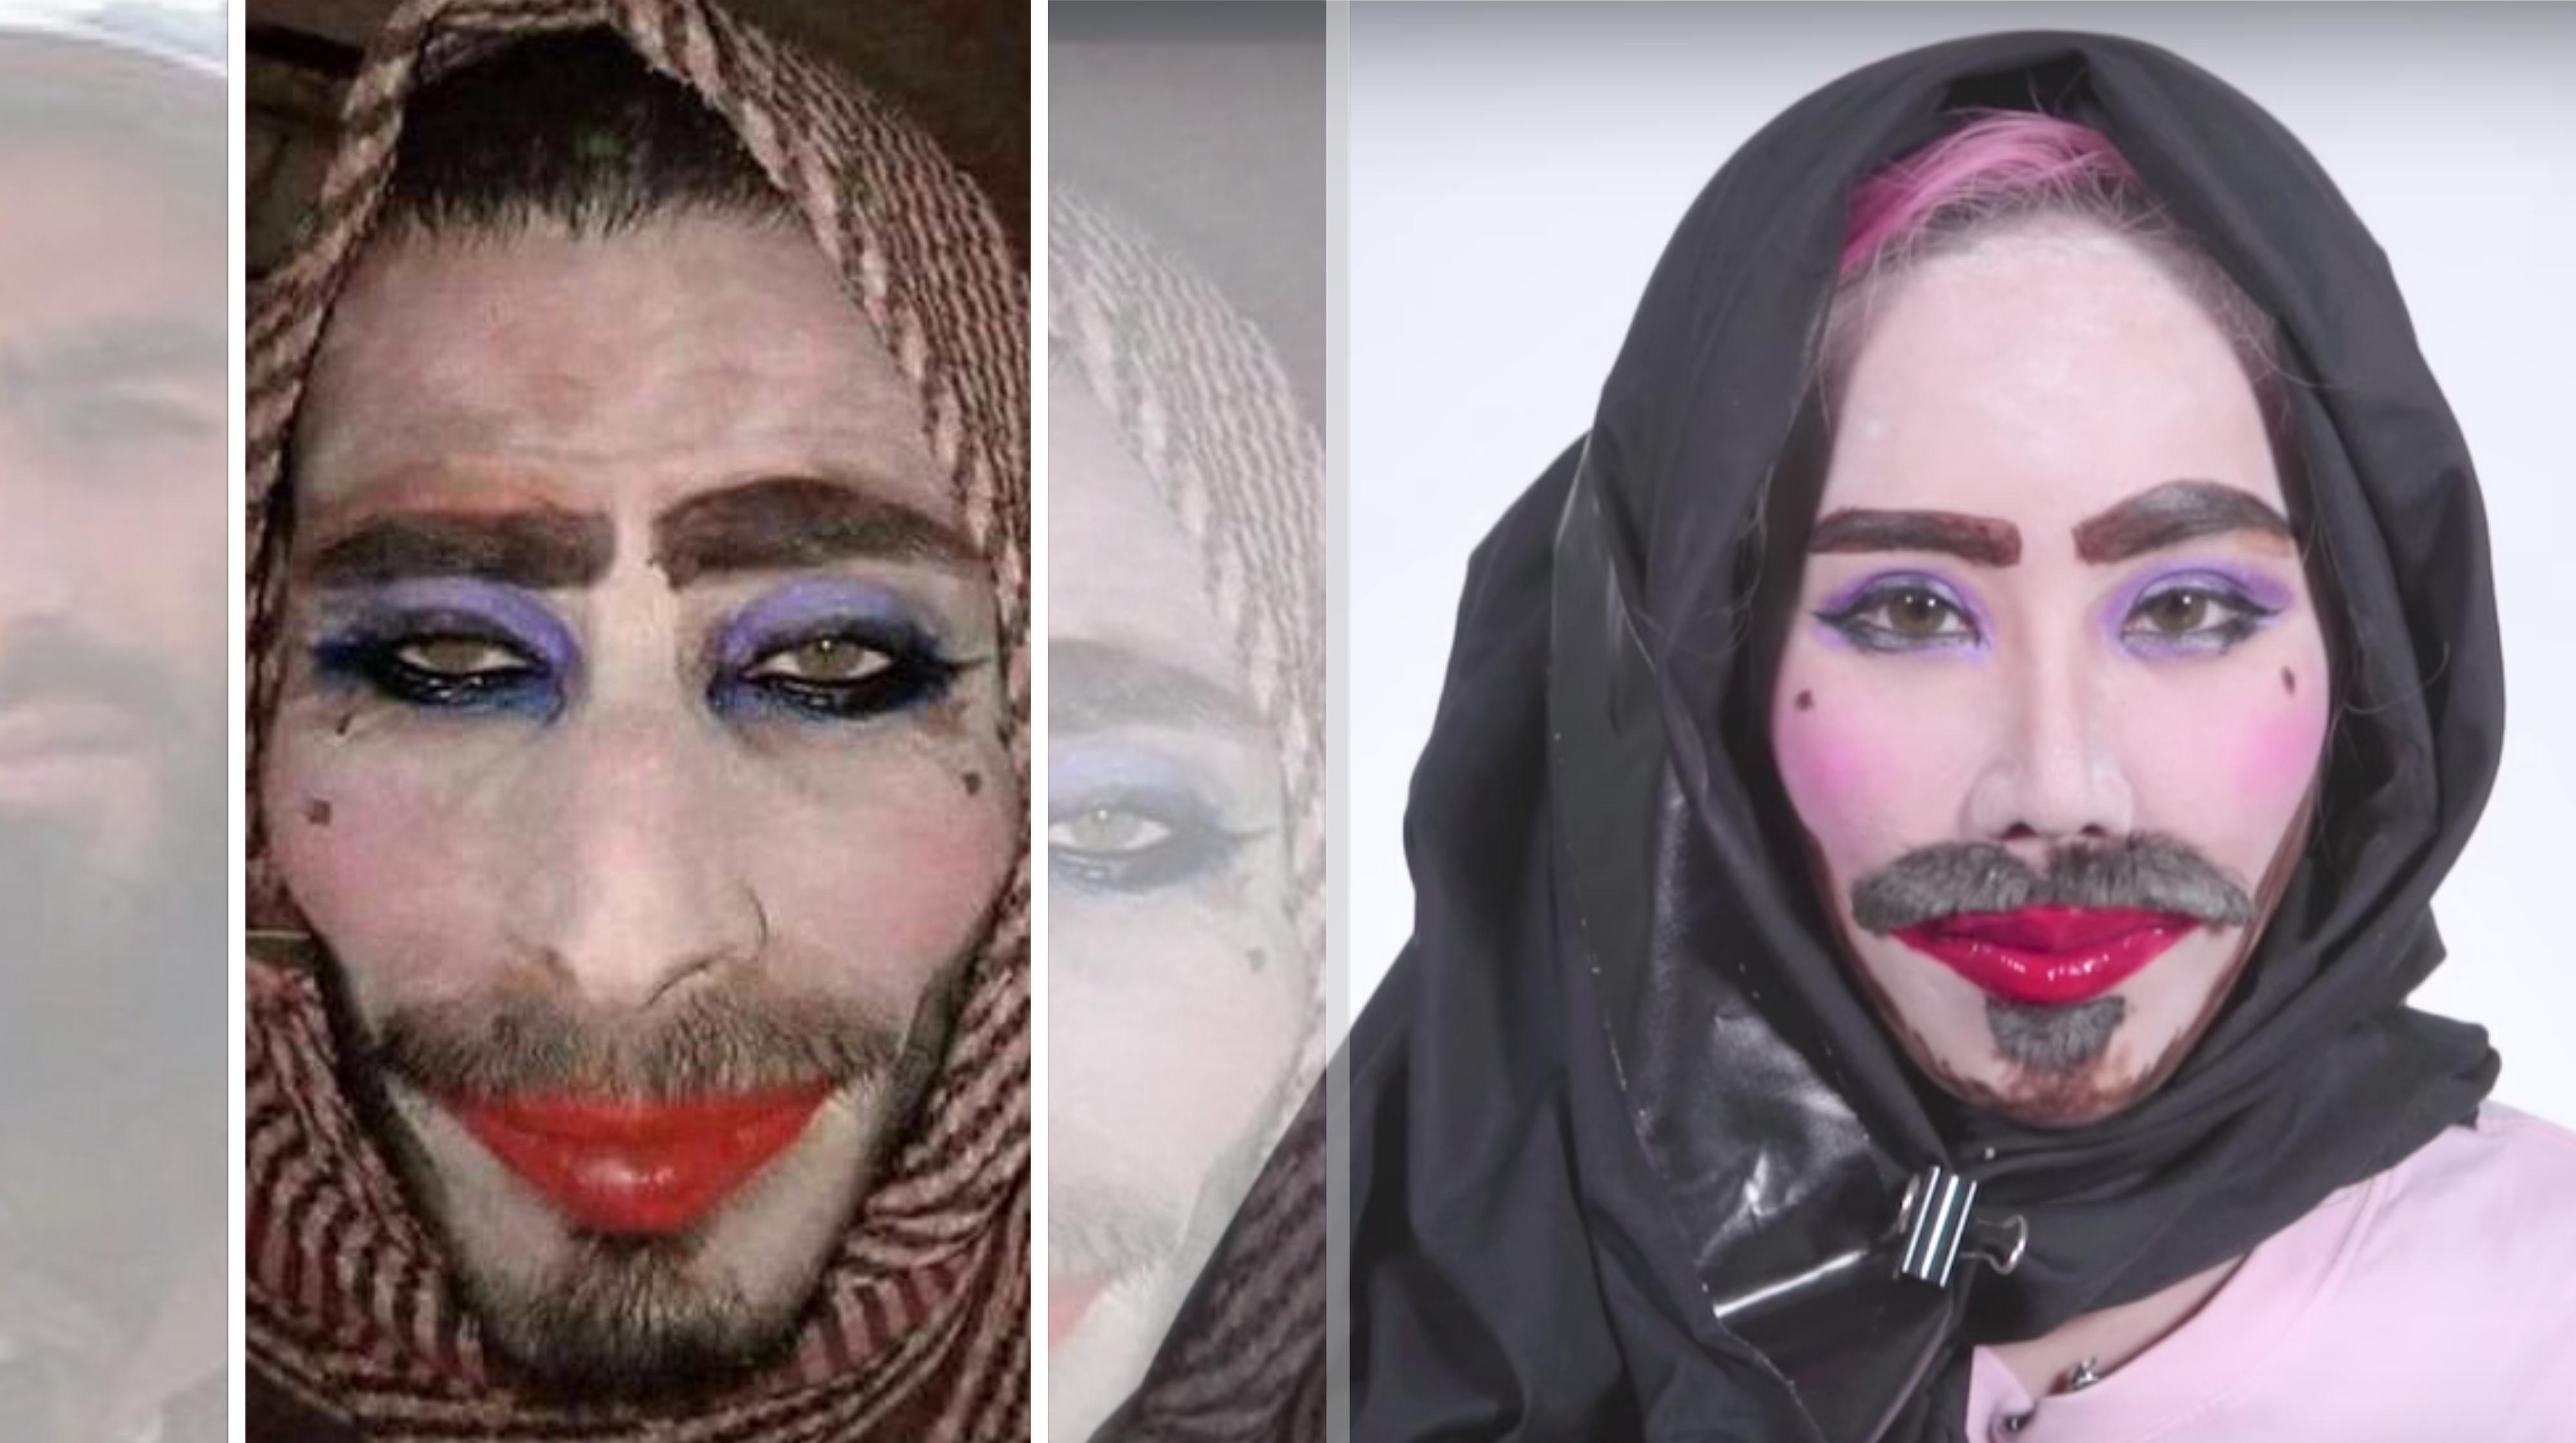 Xiaxue re-creates ISIS makeup look and we almost can't tell who the real terrorist is